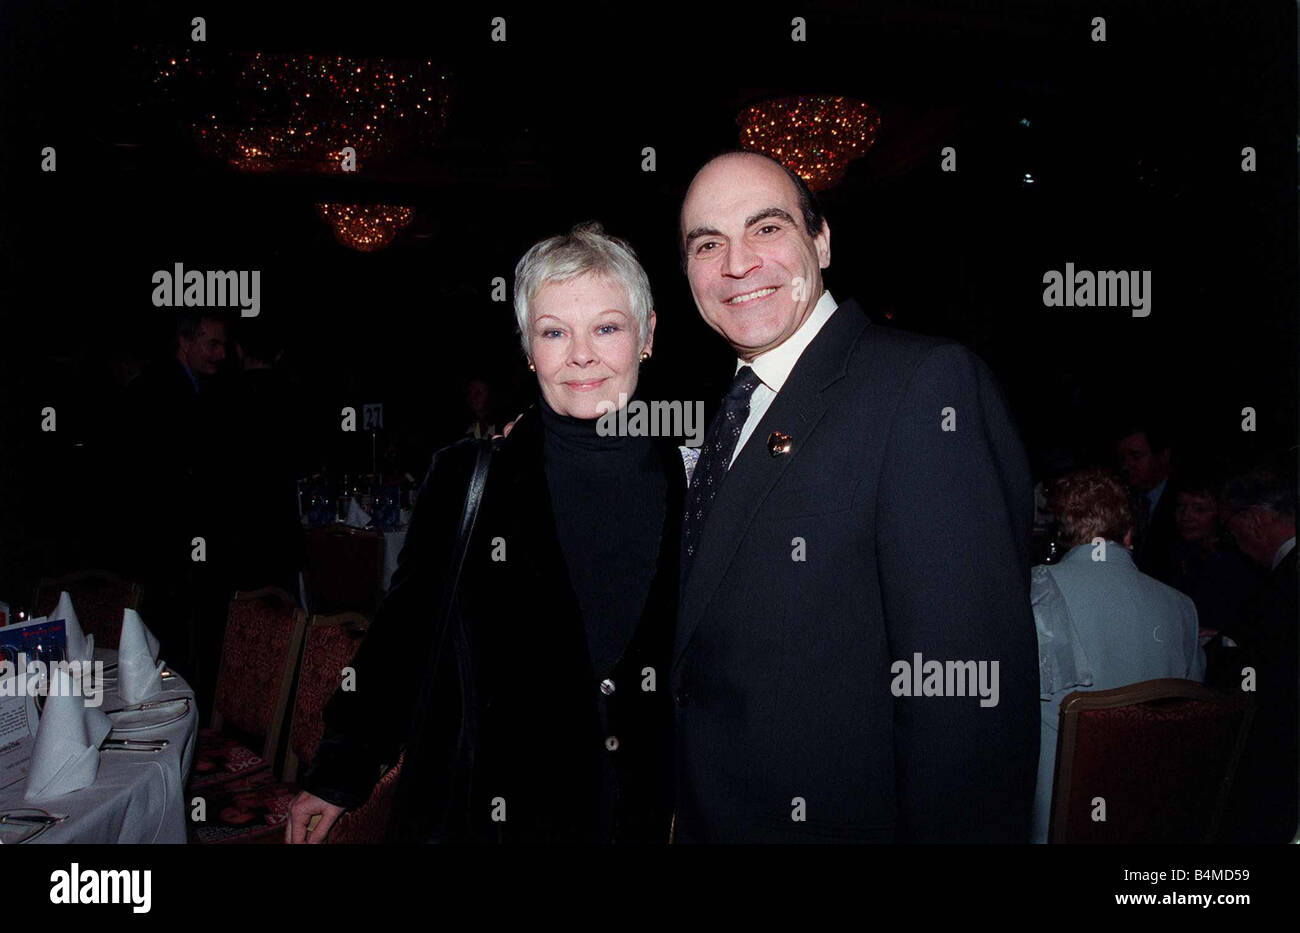 Dame Judi Dench at the London Hilton for the Variety Club of Great Britain show business awards 50th anniversary with fellow actor David Suchet February 1999 Stock Photo